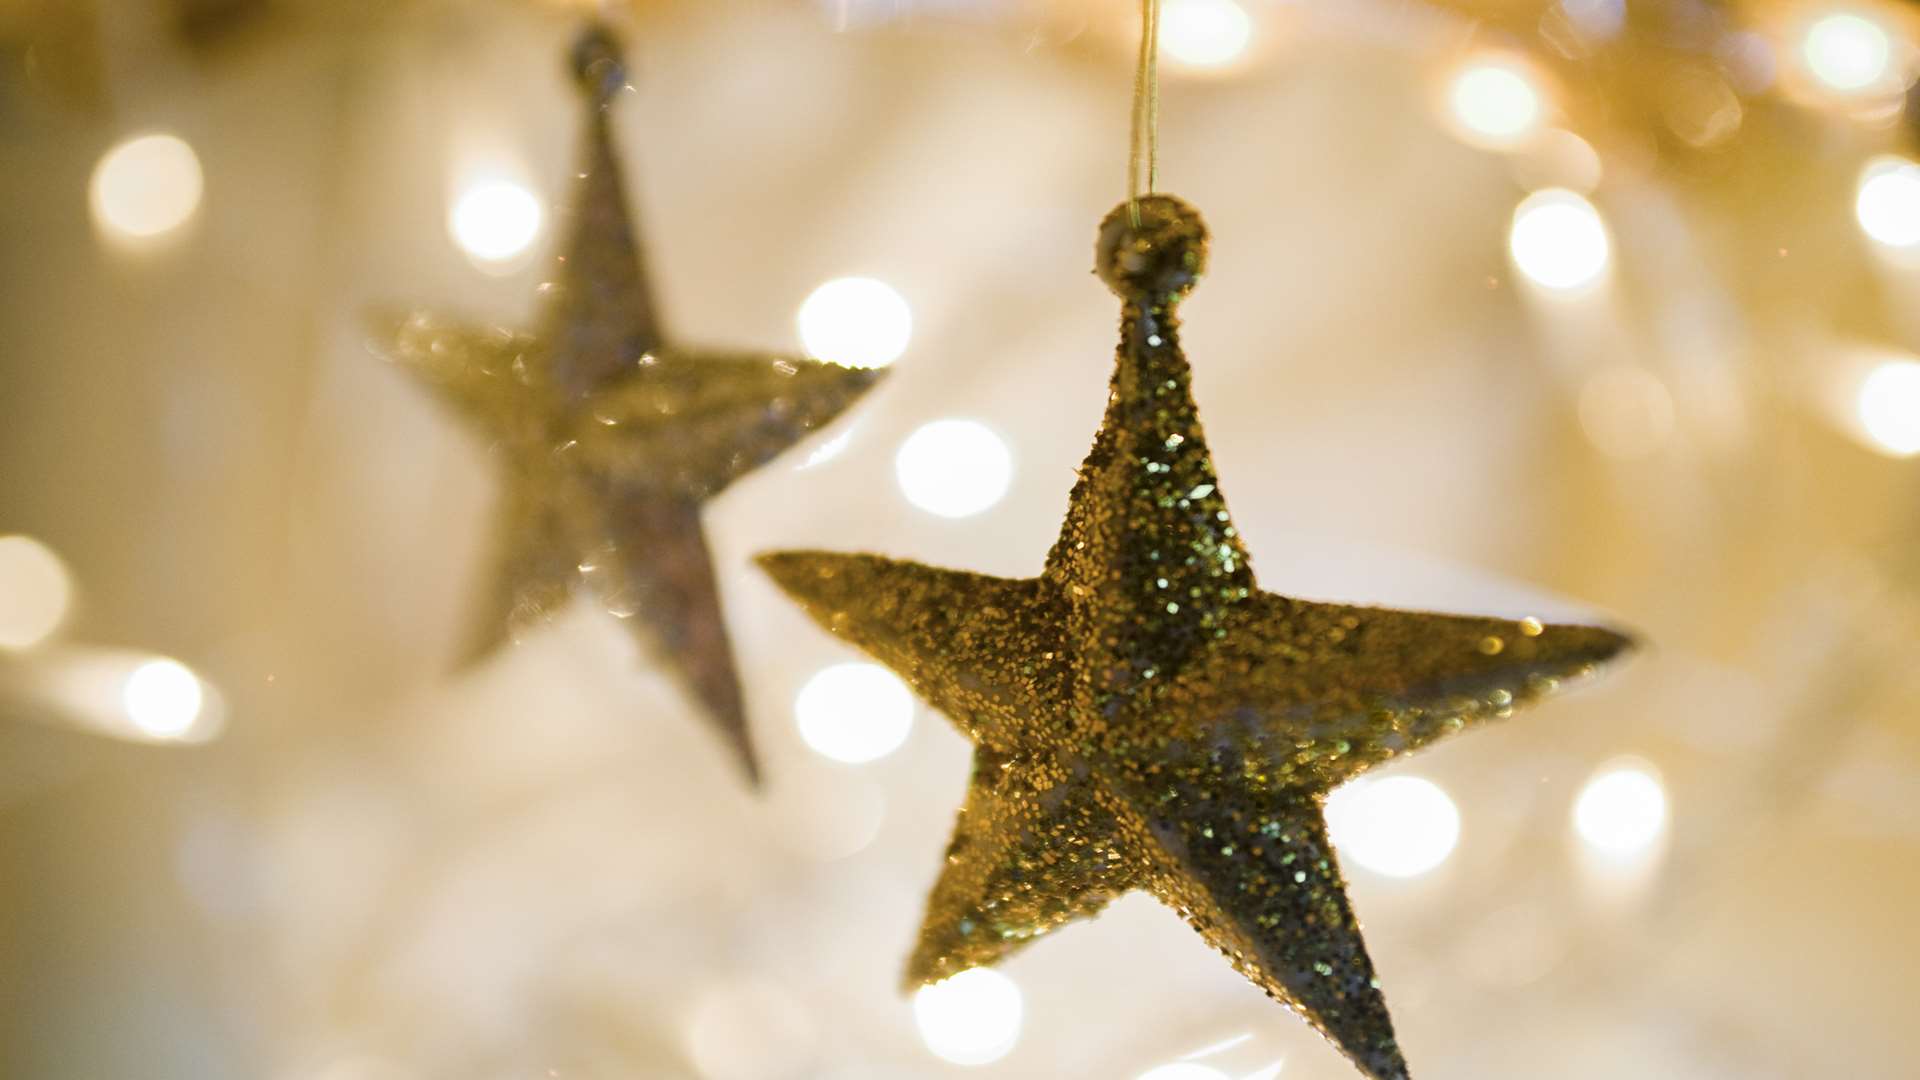 Make sure your Christmas tree doesn't run out of sparkle